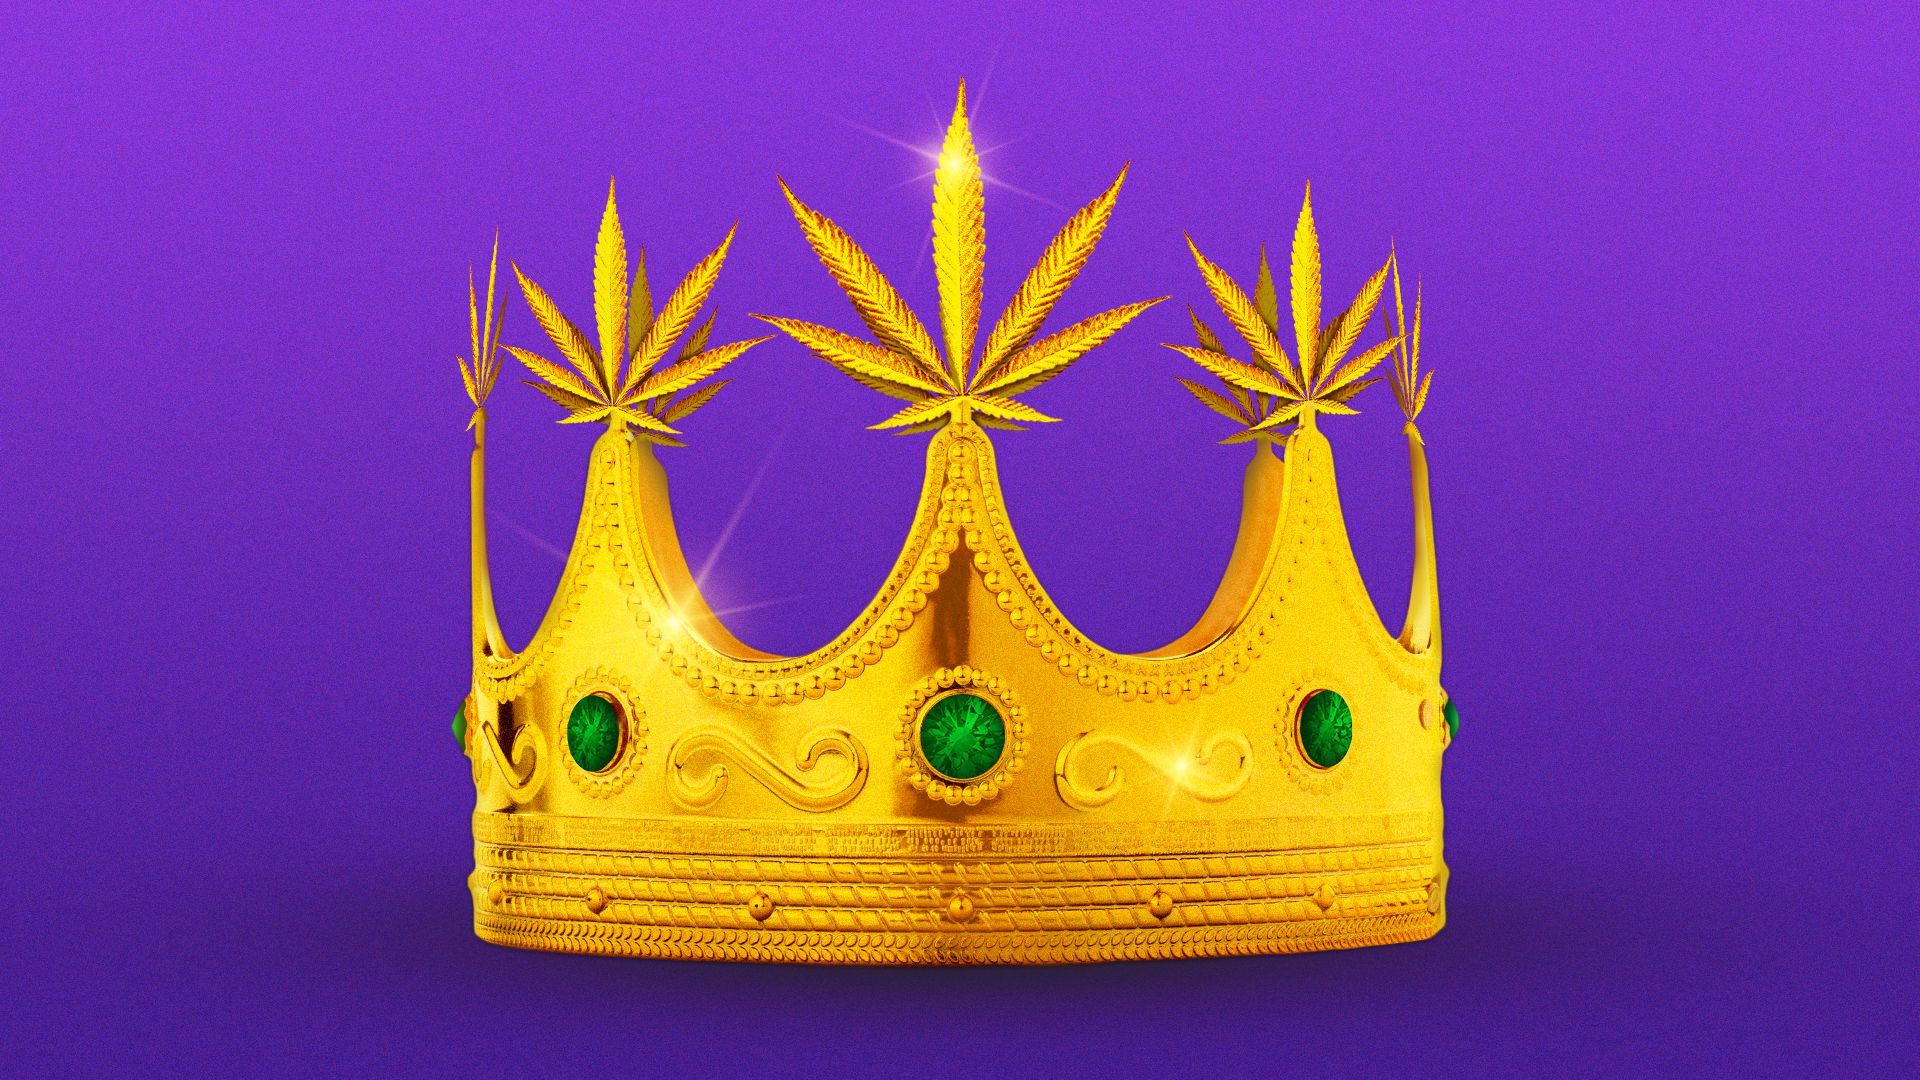 Illustration of a gold crown with green jewels and the peaks of the crown form marijuana leaves.